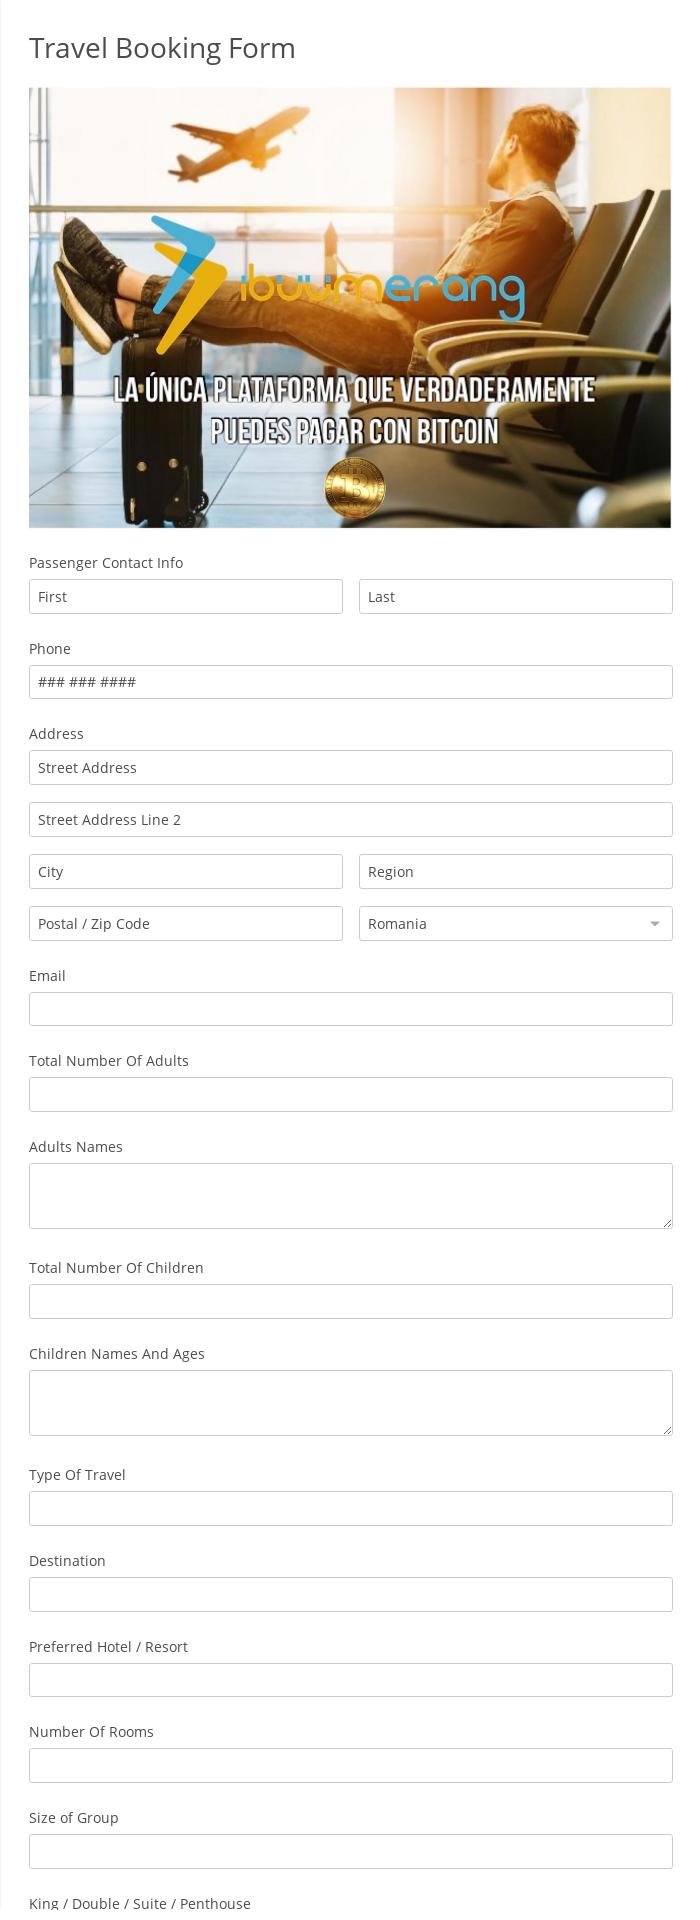 Travel Booking Form